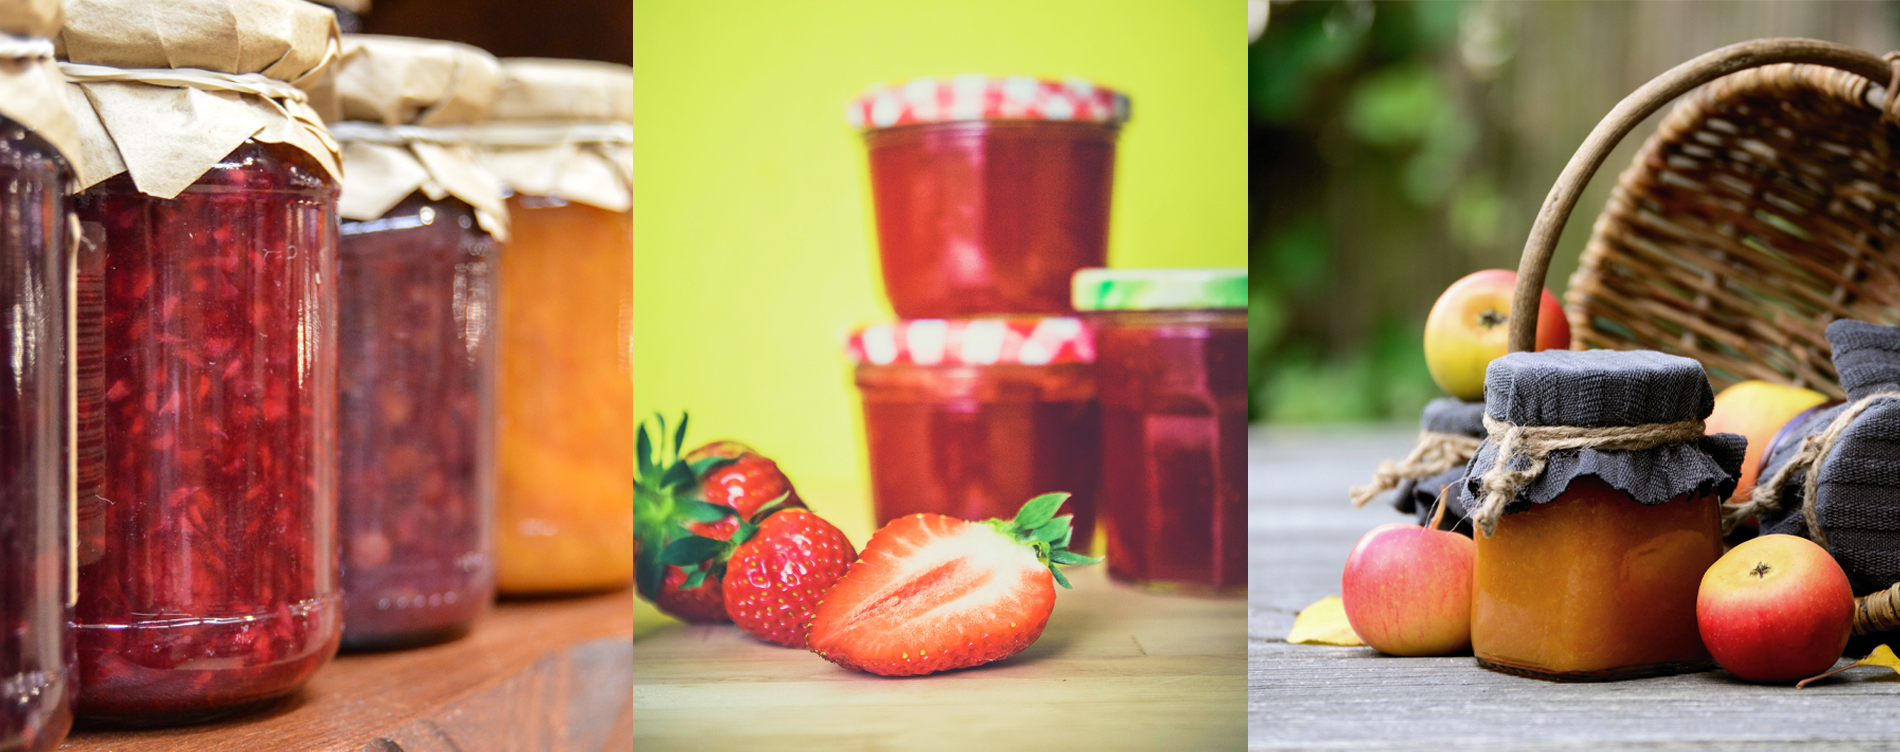 3 images showing canned preserves and fruits.